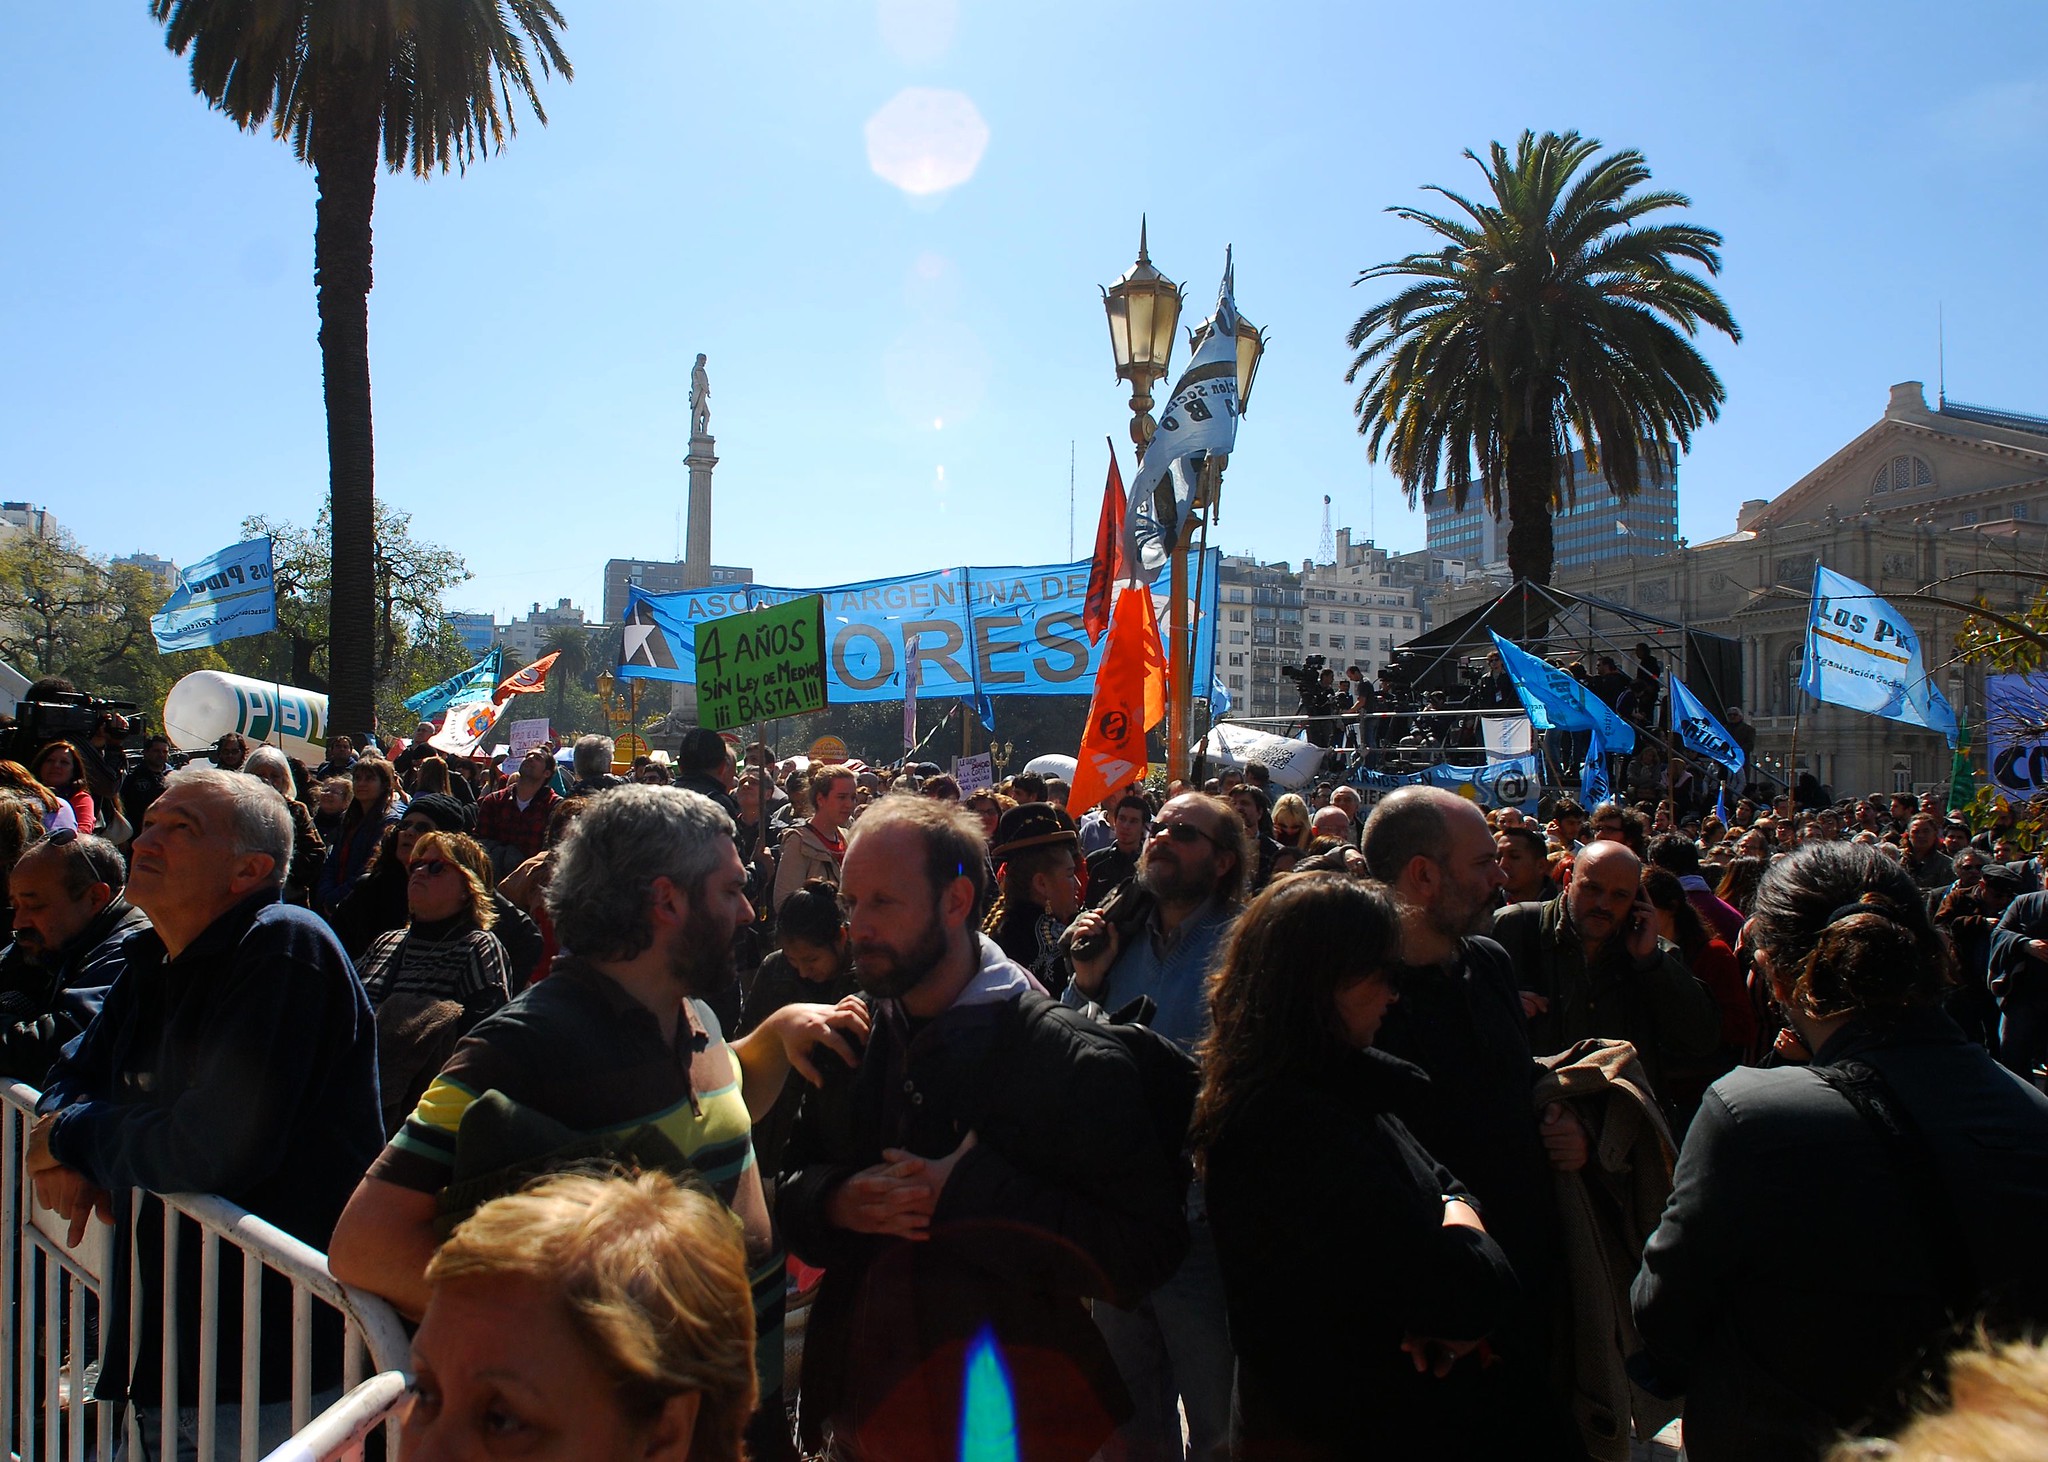 A public gathering ahead of the 2013 elections in Argentina. (<a href="https://www.flickr.com/photos/blmurch/9622939480/in/photostream/" target="_blank">Photo </a>by Beatrice Murch / <a href="https://creativecommons.org/licenses/by/2.0/" target="_blank">CC BY 2.0</a>)